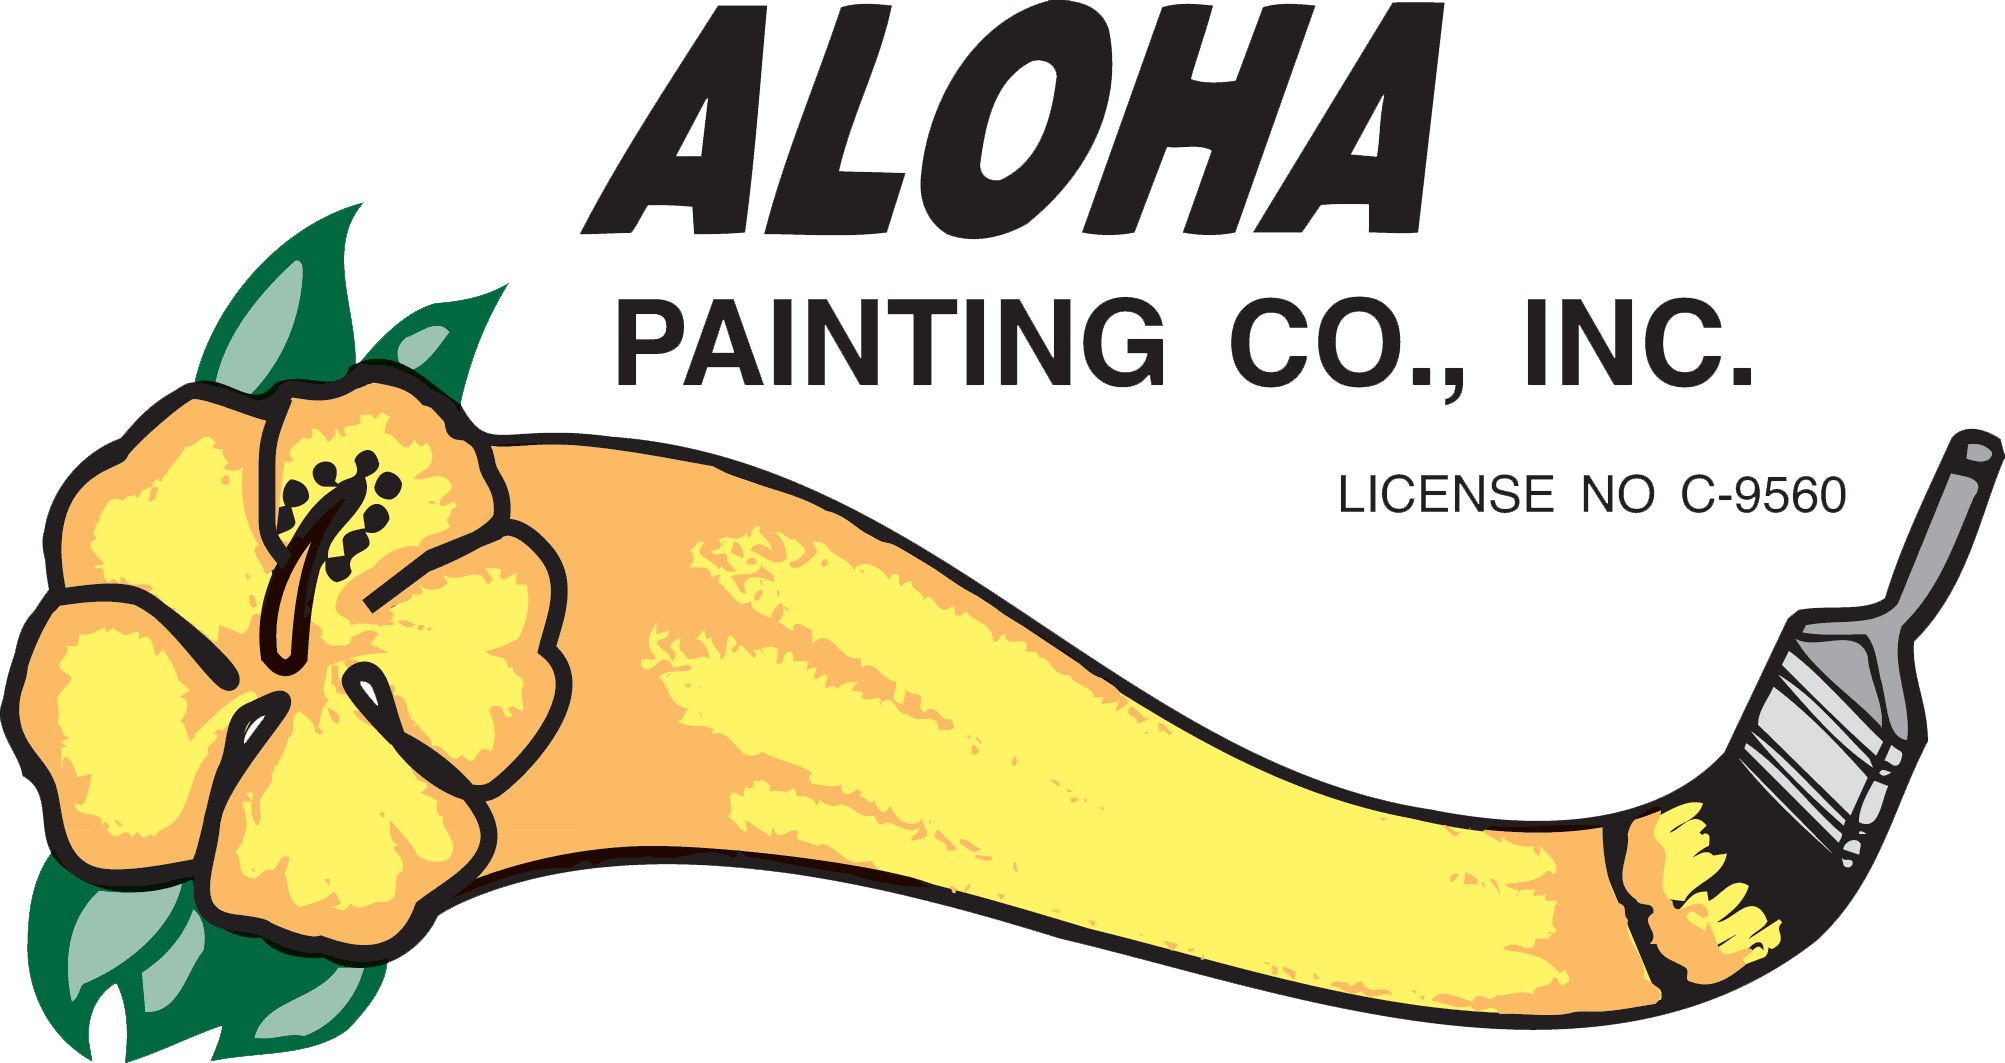 Aloha Painting Services - Decorating Contractors Of America (2005x1063)